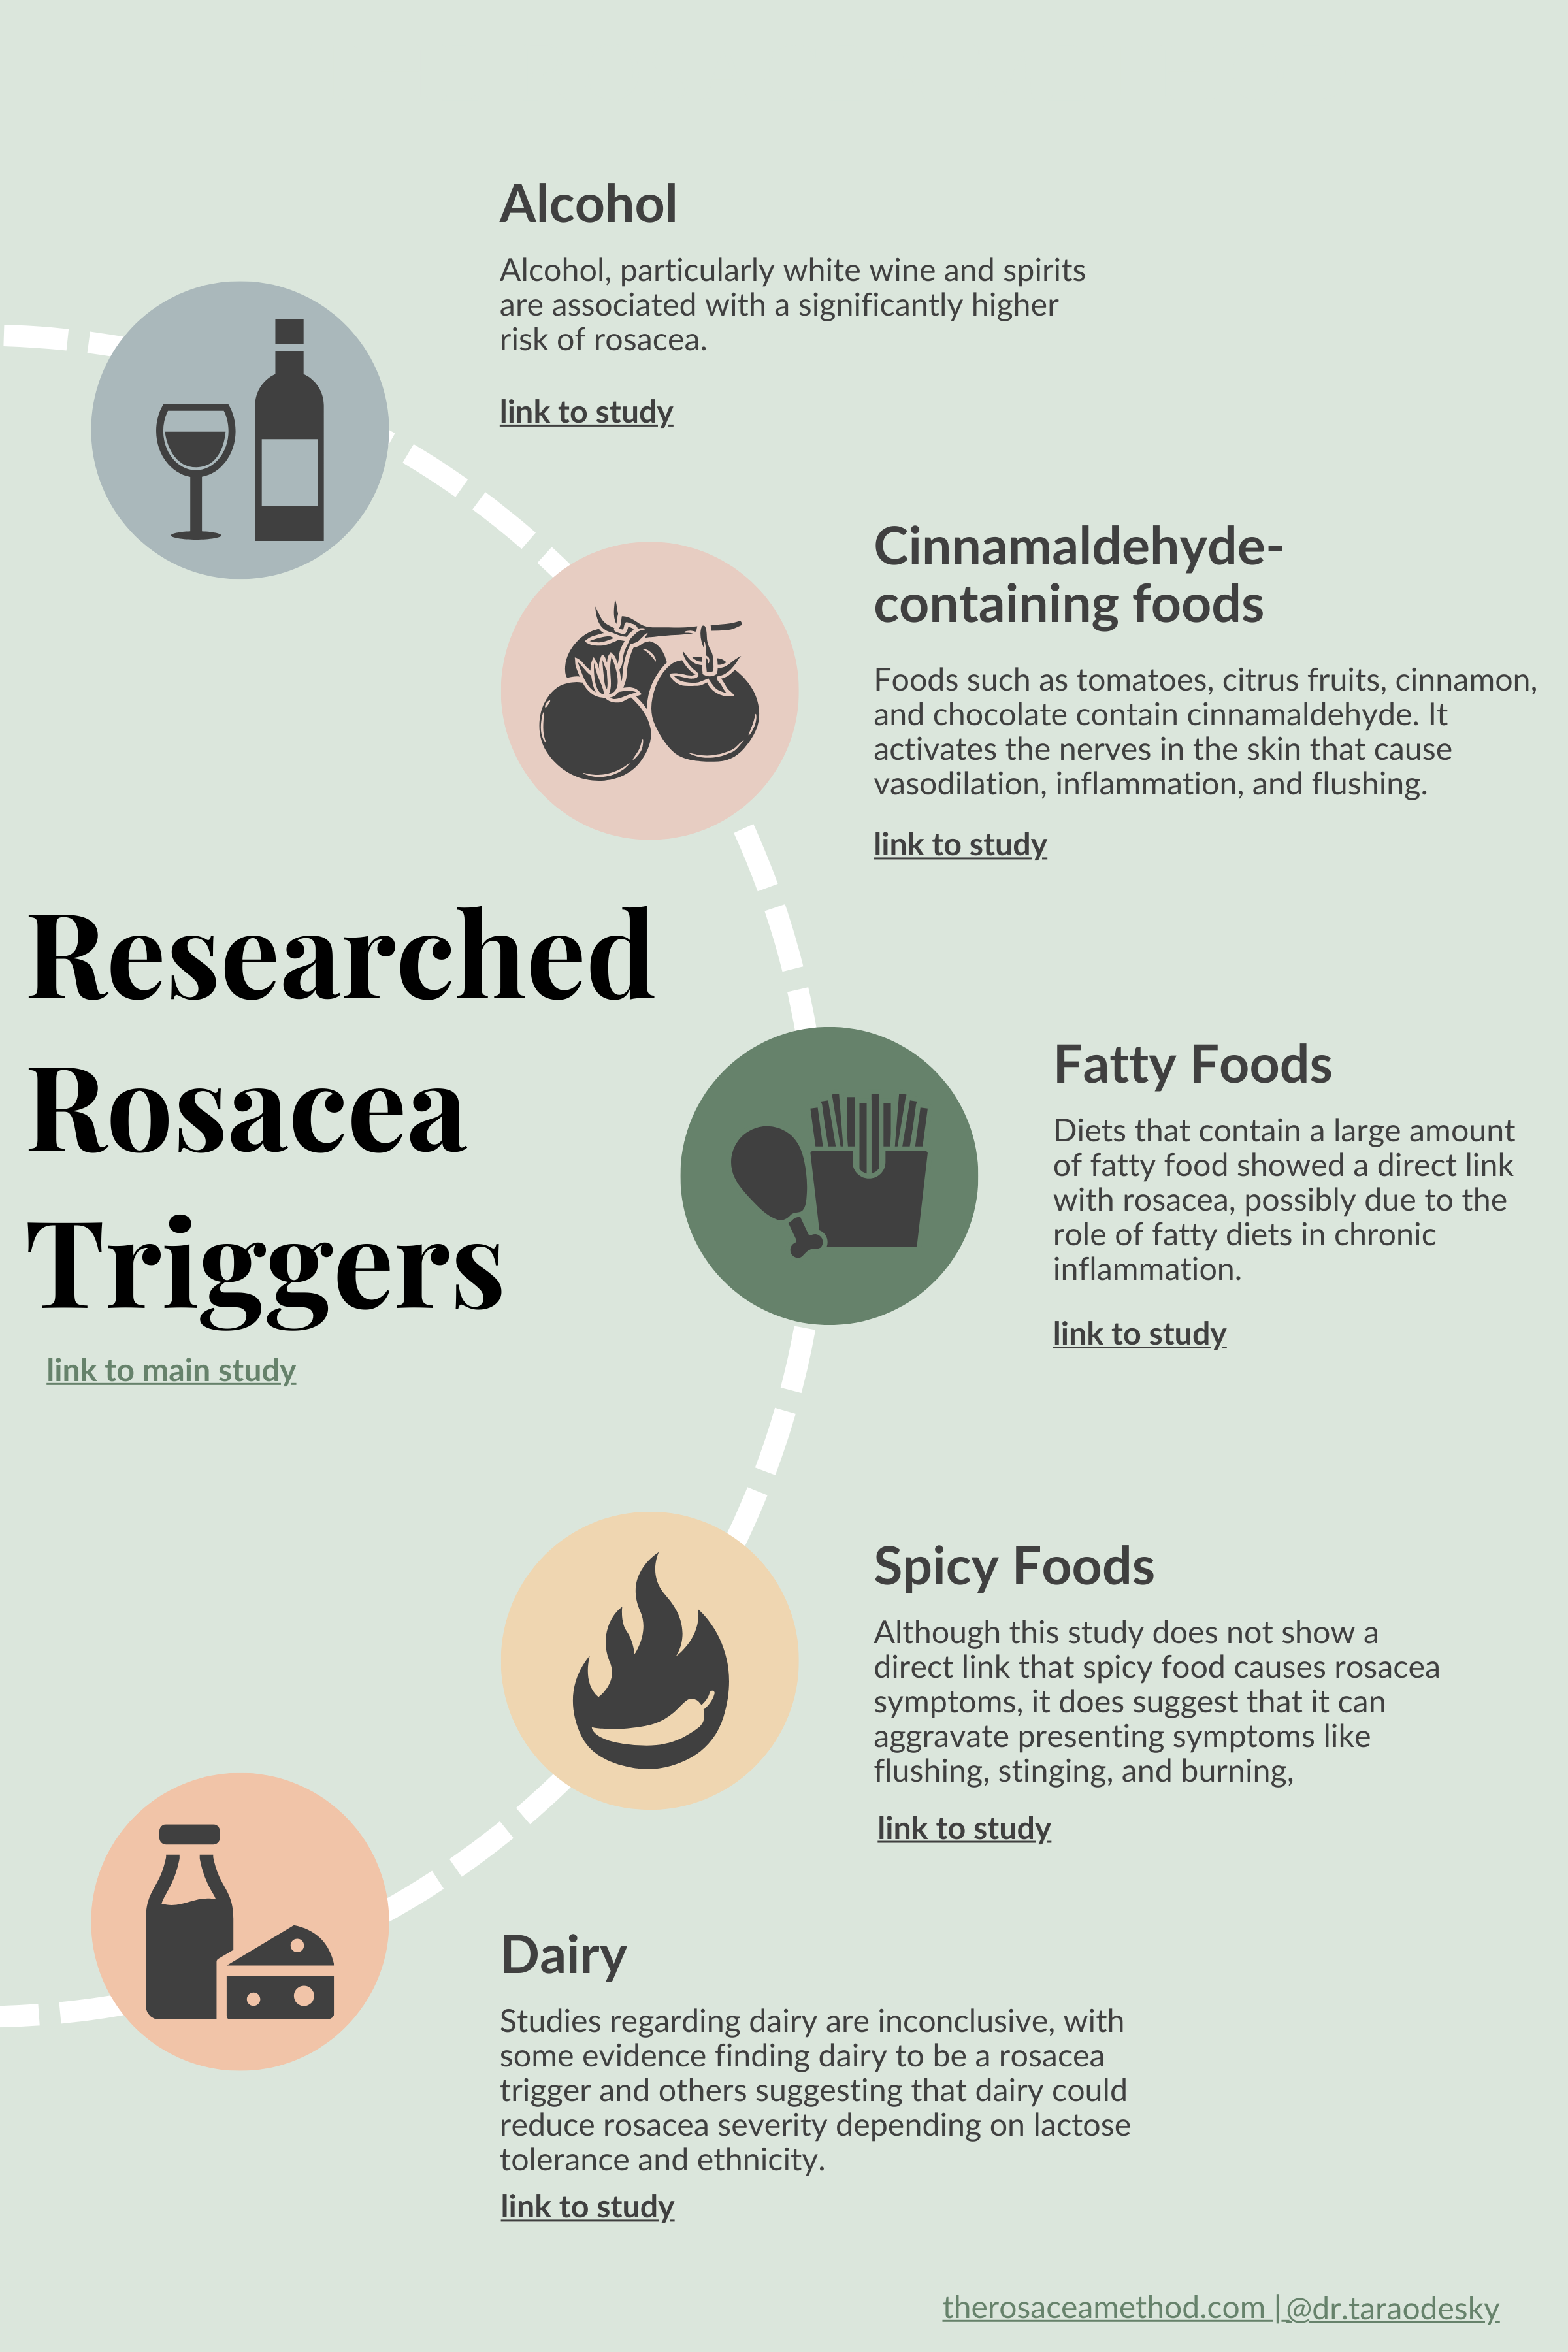 These 5 rosacea triggers are the most researched and backed by multiple scientific research studies that are linked: alcohol, cinnamaldehyde, fatty foods, spicy foods, and dairy products.